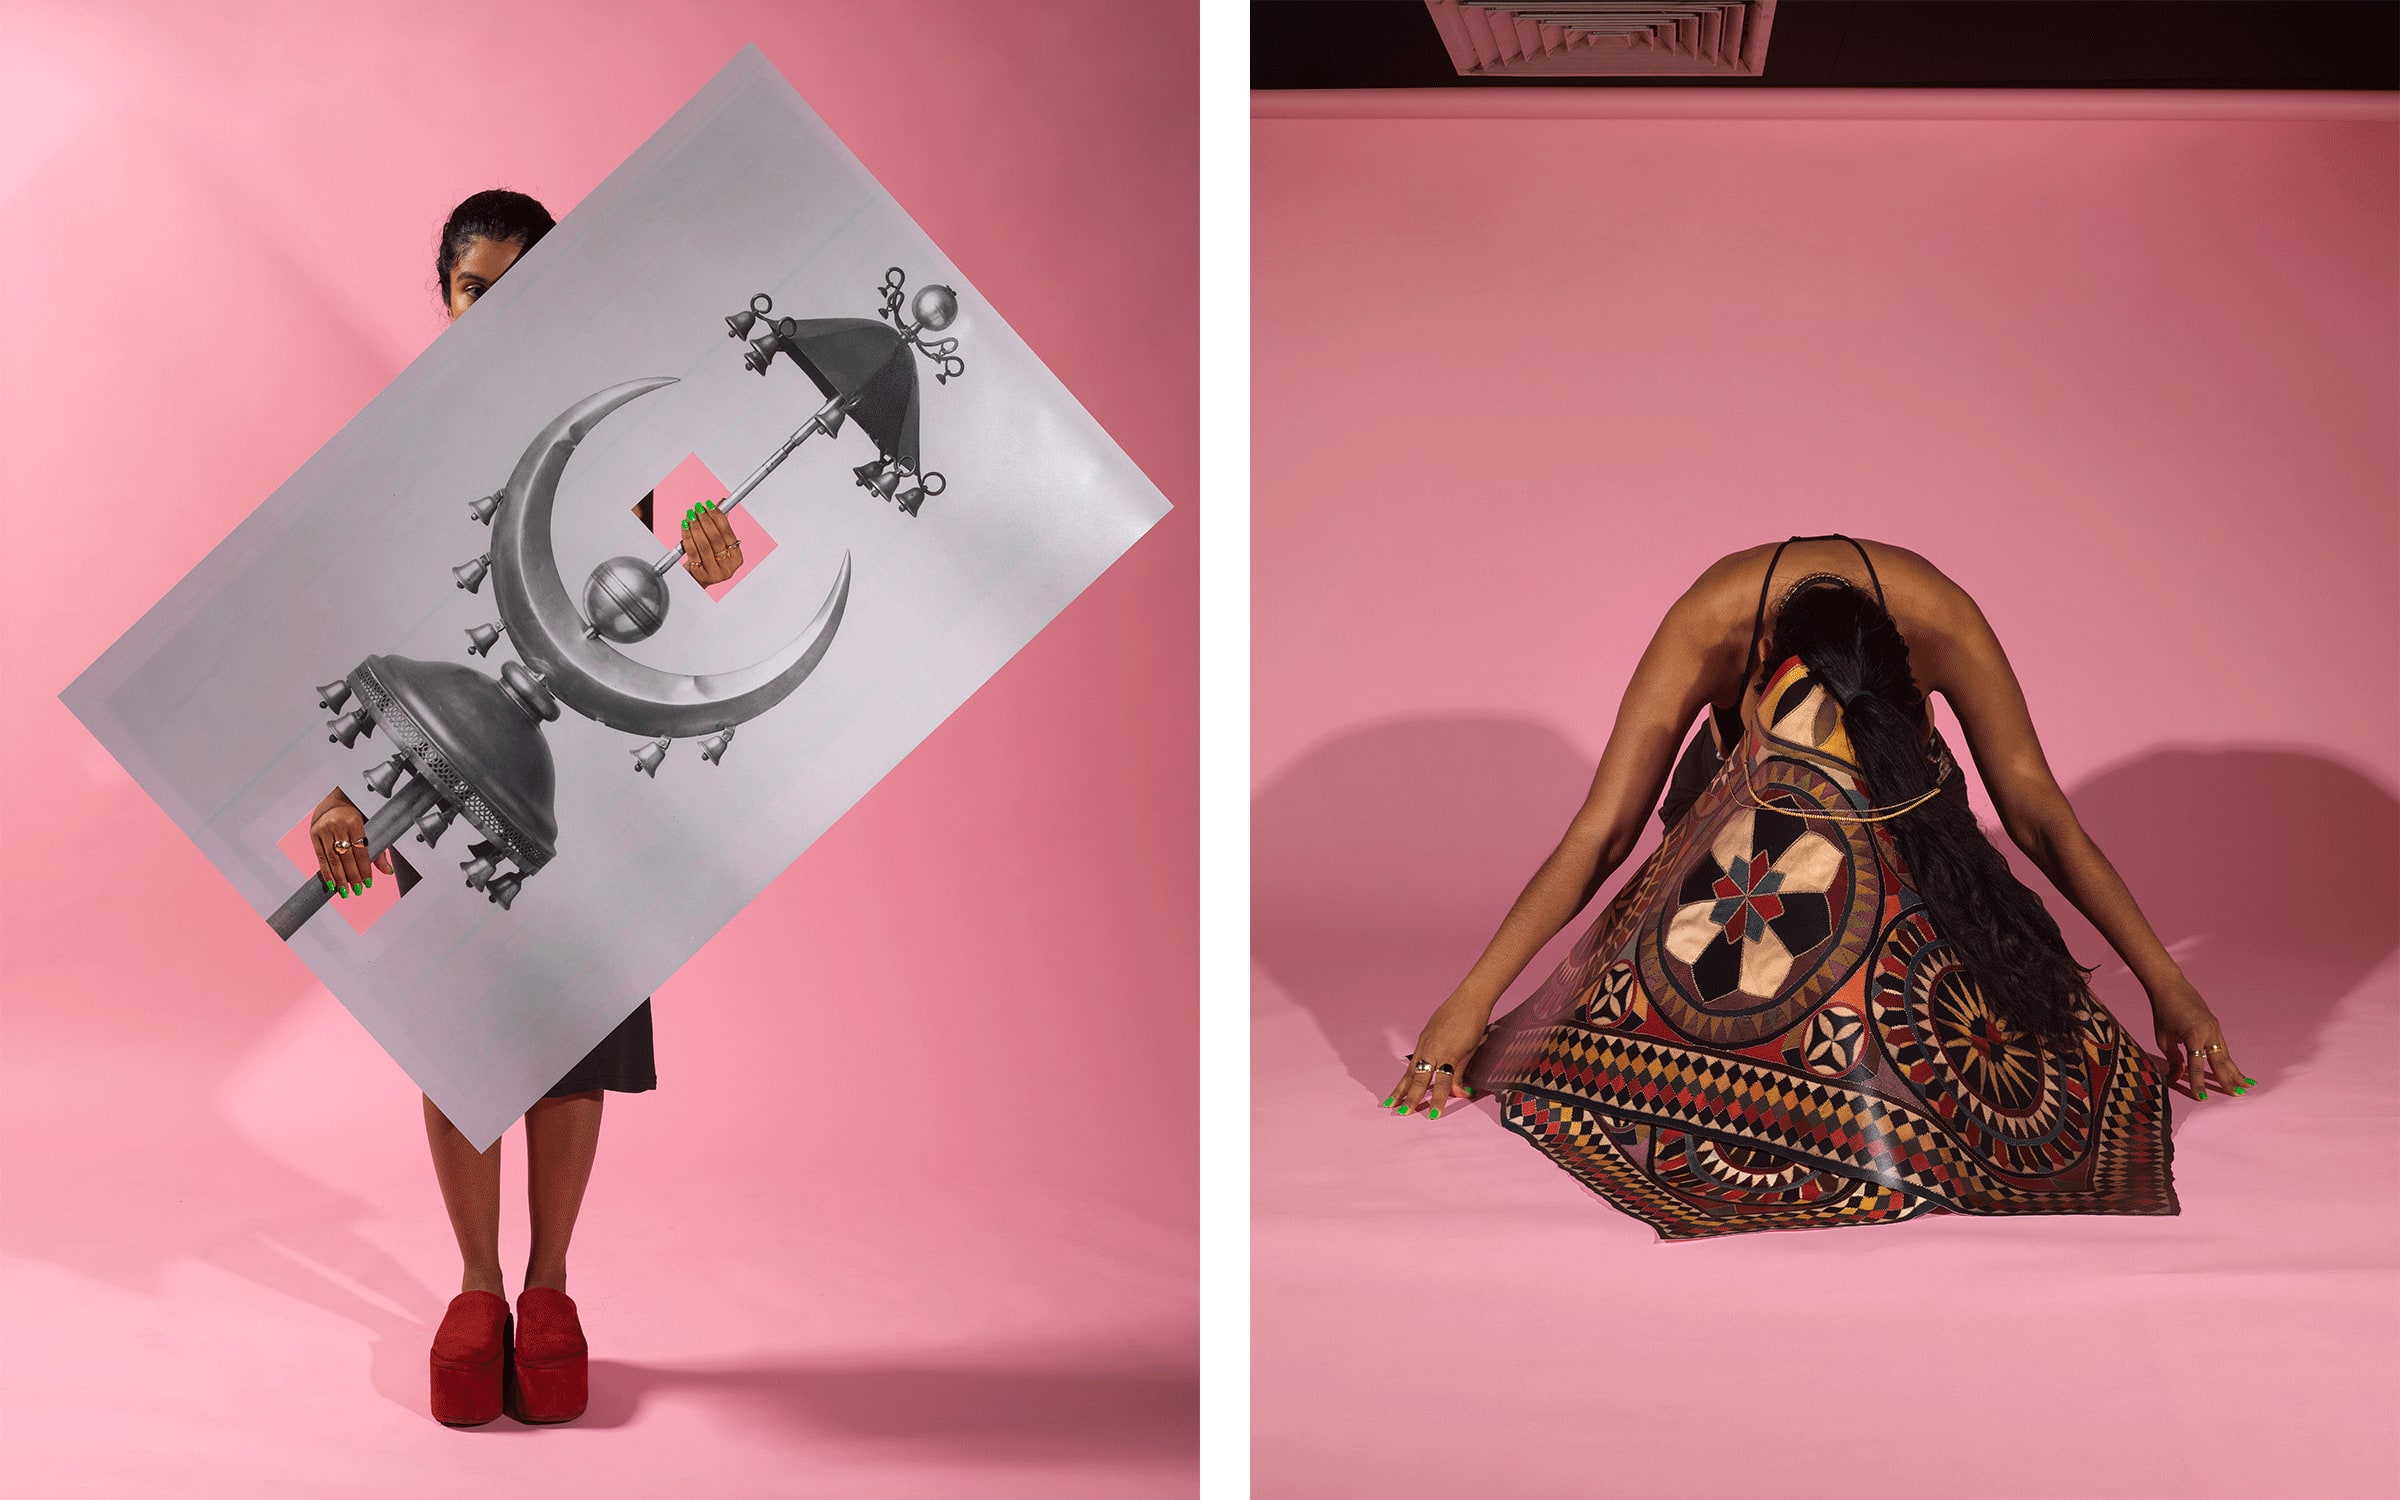 Left: Baseera Khan, Processional in Turkey, Pink, 2023. Courtesy of the artist and Simone Subal Gallery. Right: Baseera Khan, Tent Square, Pink, 2023. Courtesy of the artist and Simone Subal Gallery.